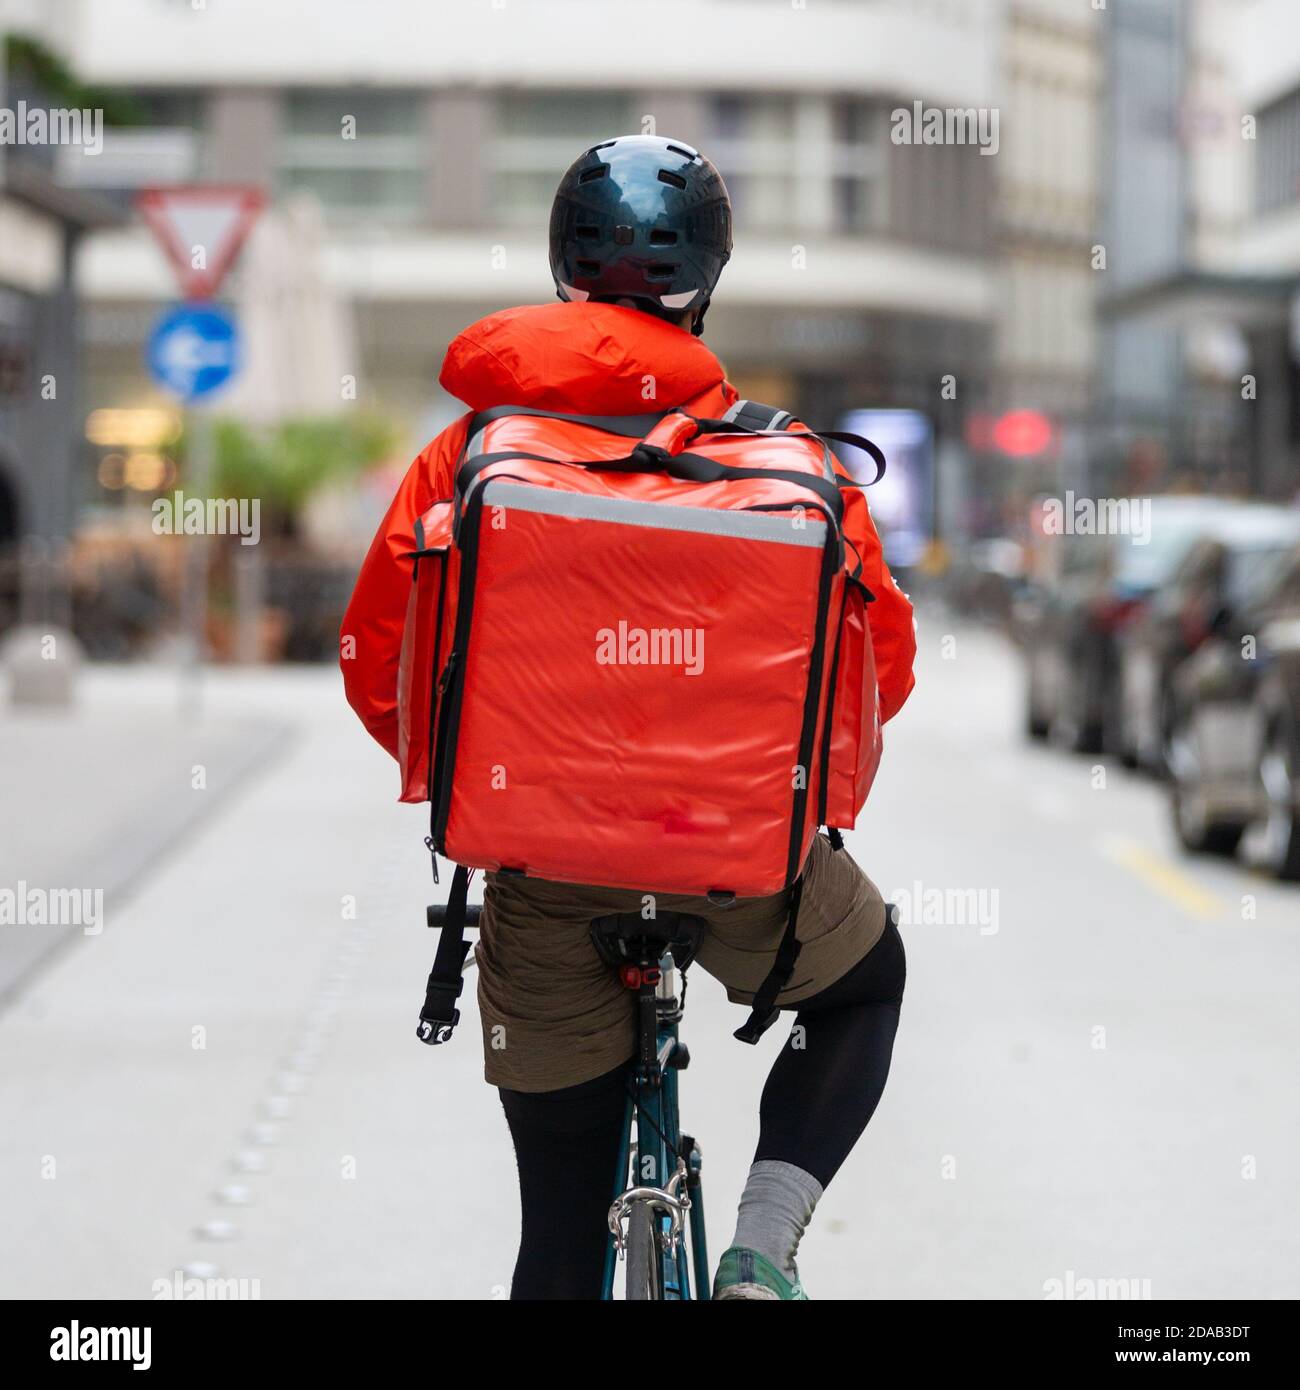 Courier On Bicycle Delivering Food In City. Stock Photo